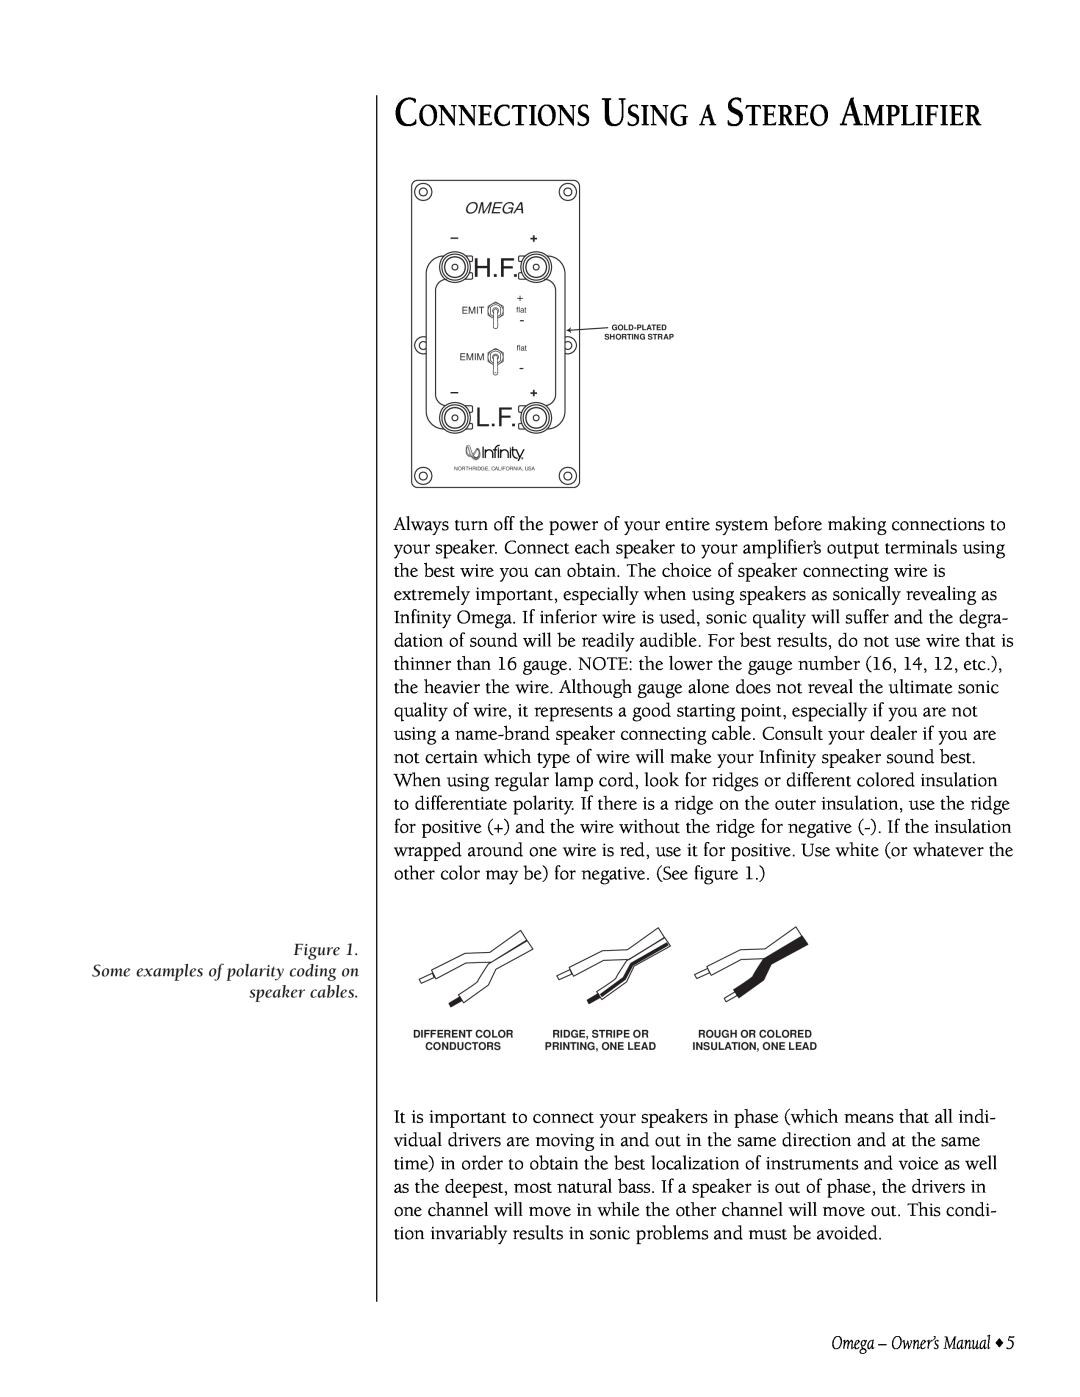 Infiniti 9301297-001 owner manual Connections Using A Stereo Amplifier 